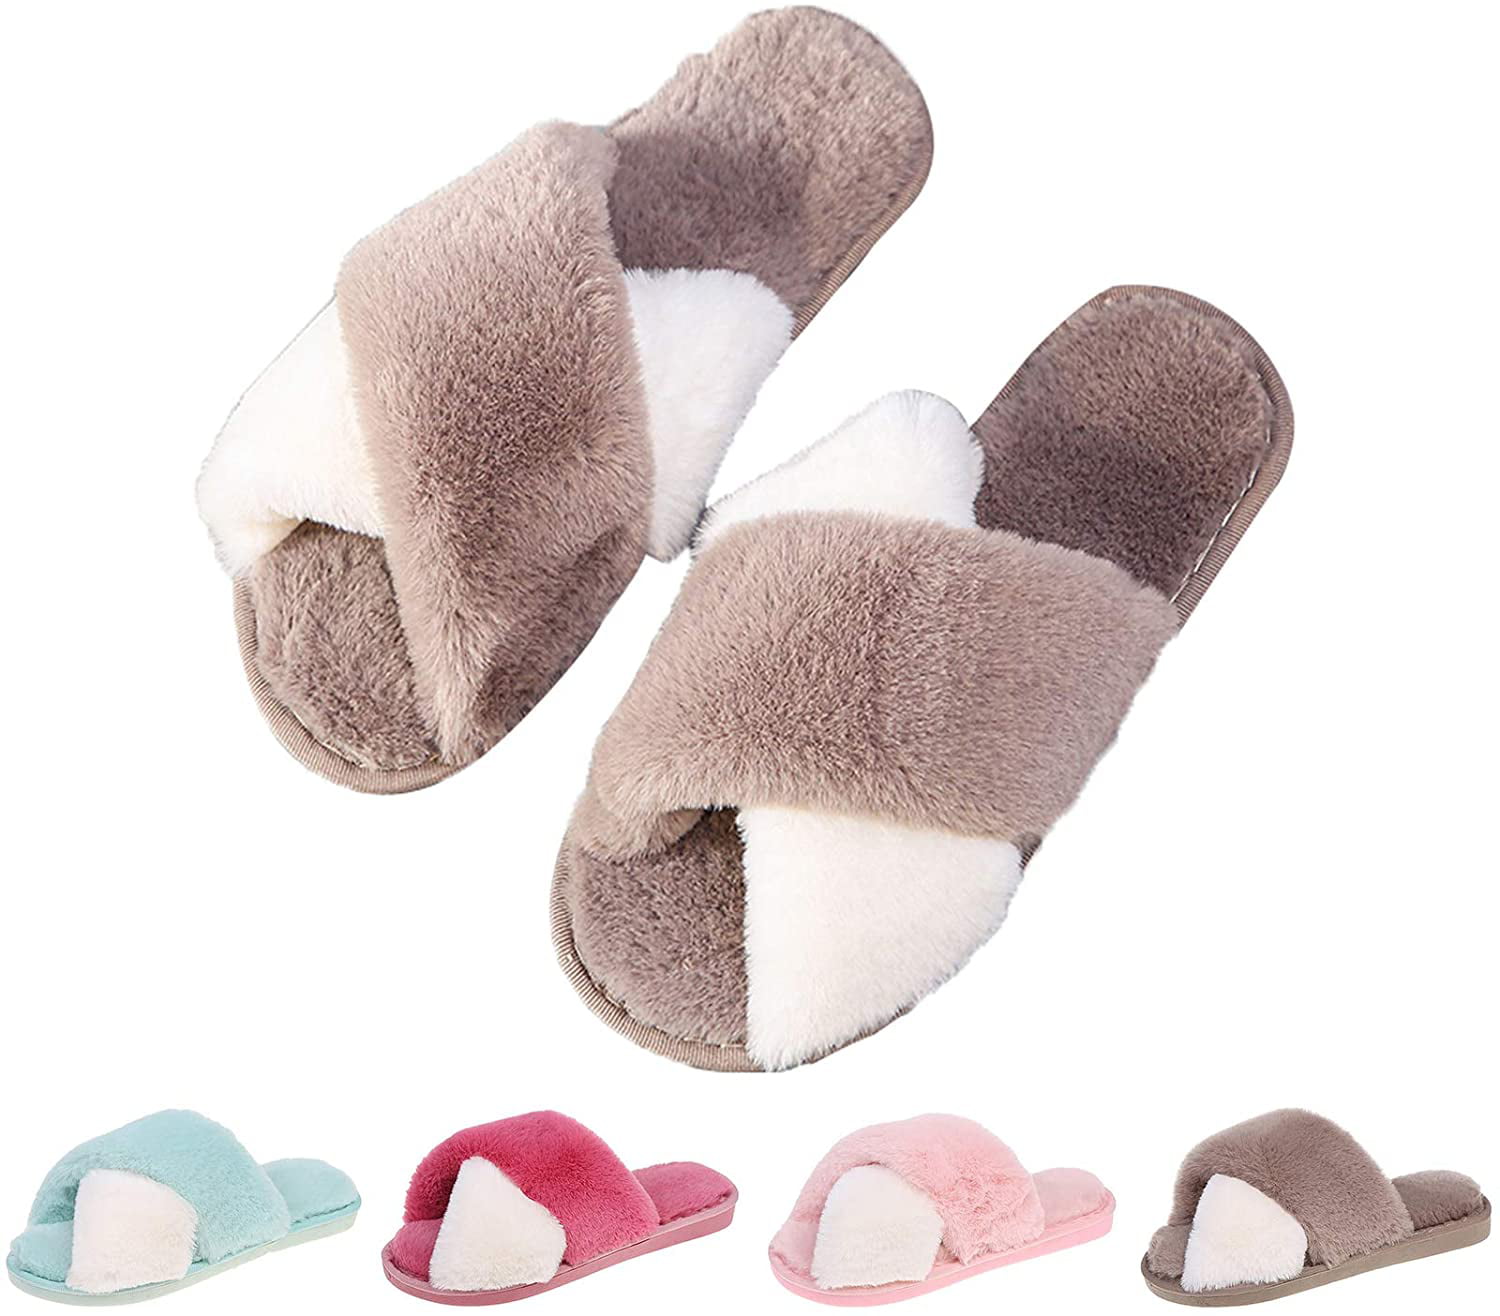 Cozy House Slippers for Women for Indoor and Outdoor Fuzzy Slippers Womens with Cross Band Open Toe Slippers Women Plush Fleece House Shoes 